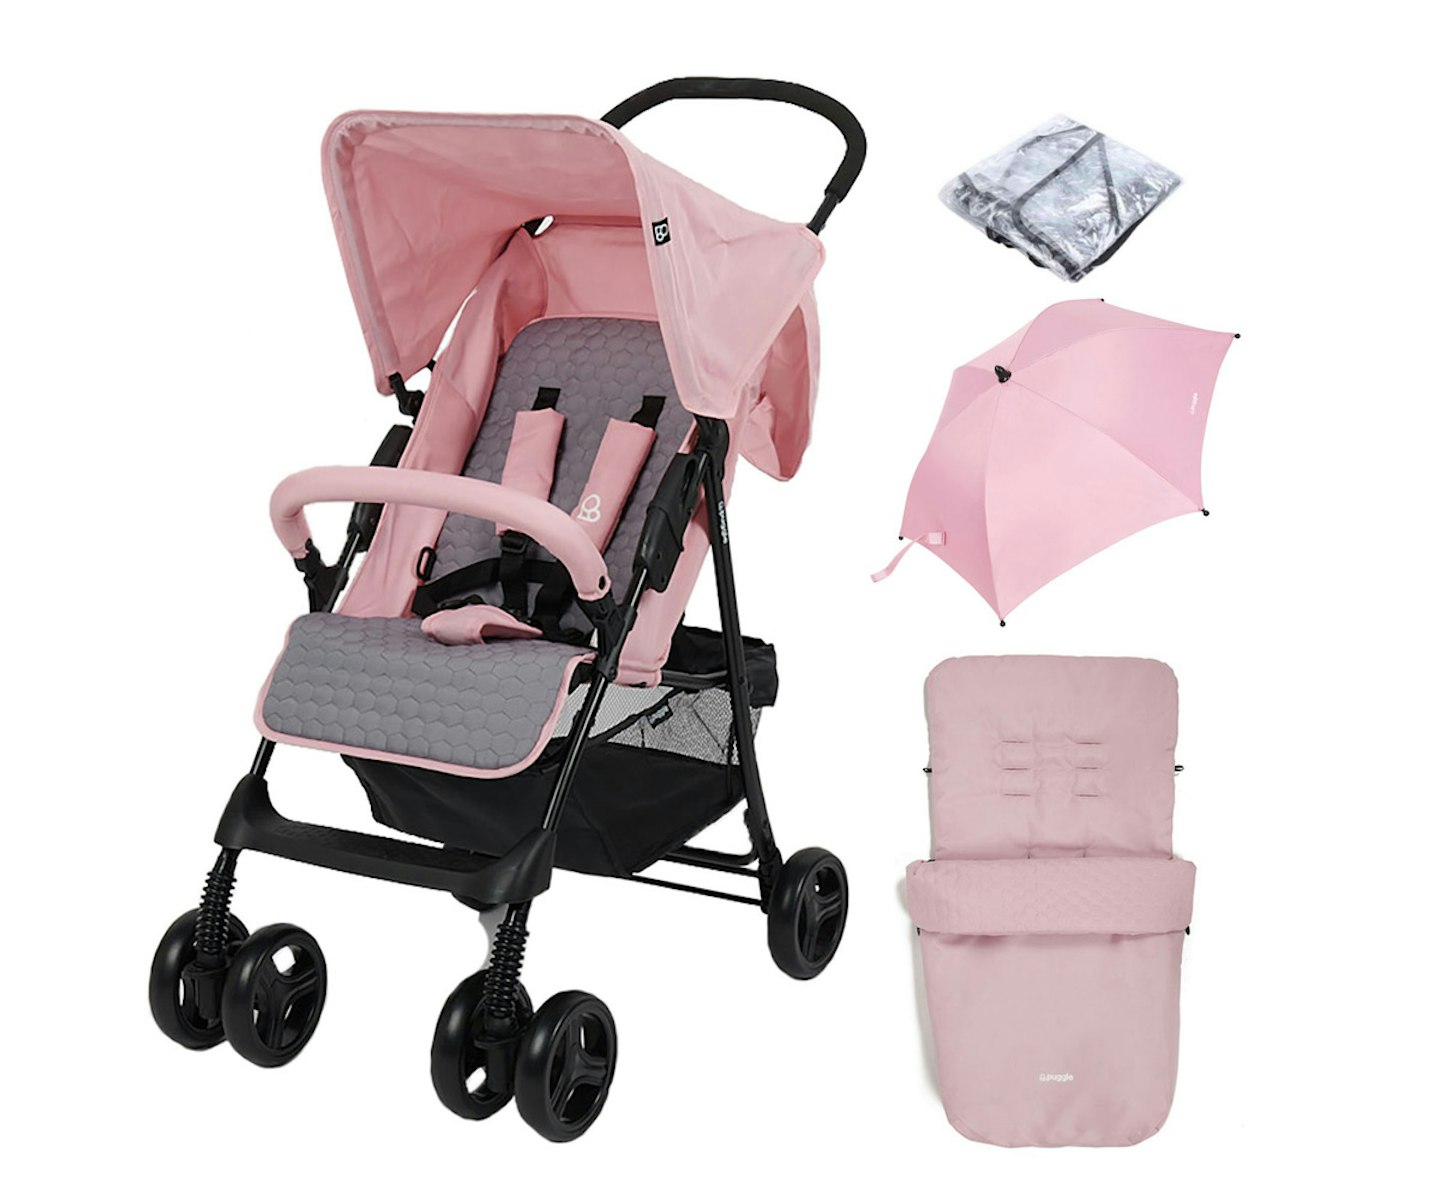 Puggle Holiday Luxe Pushchair Stroller with Raincover,